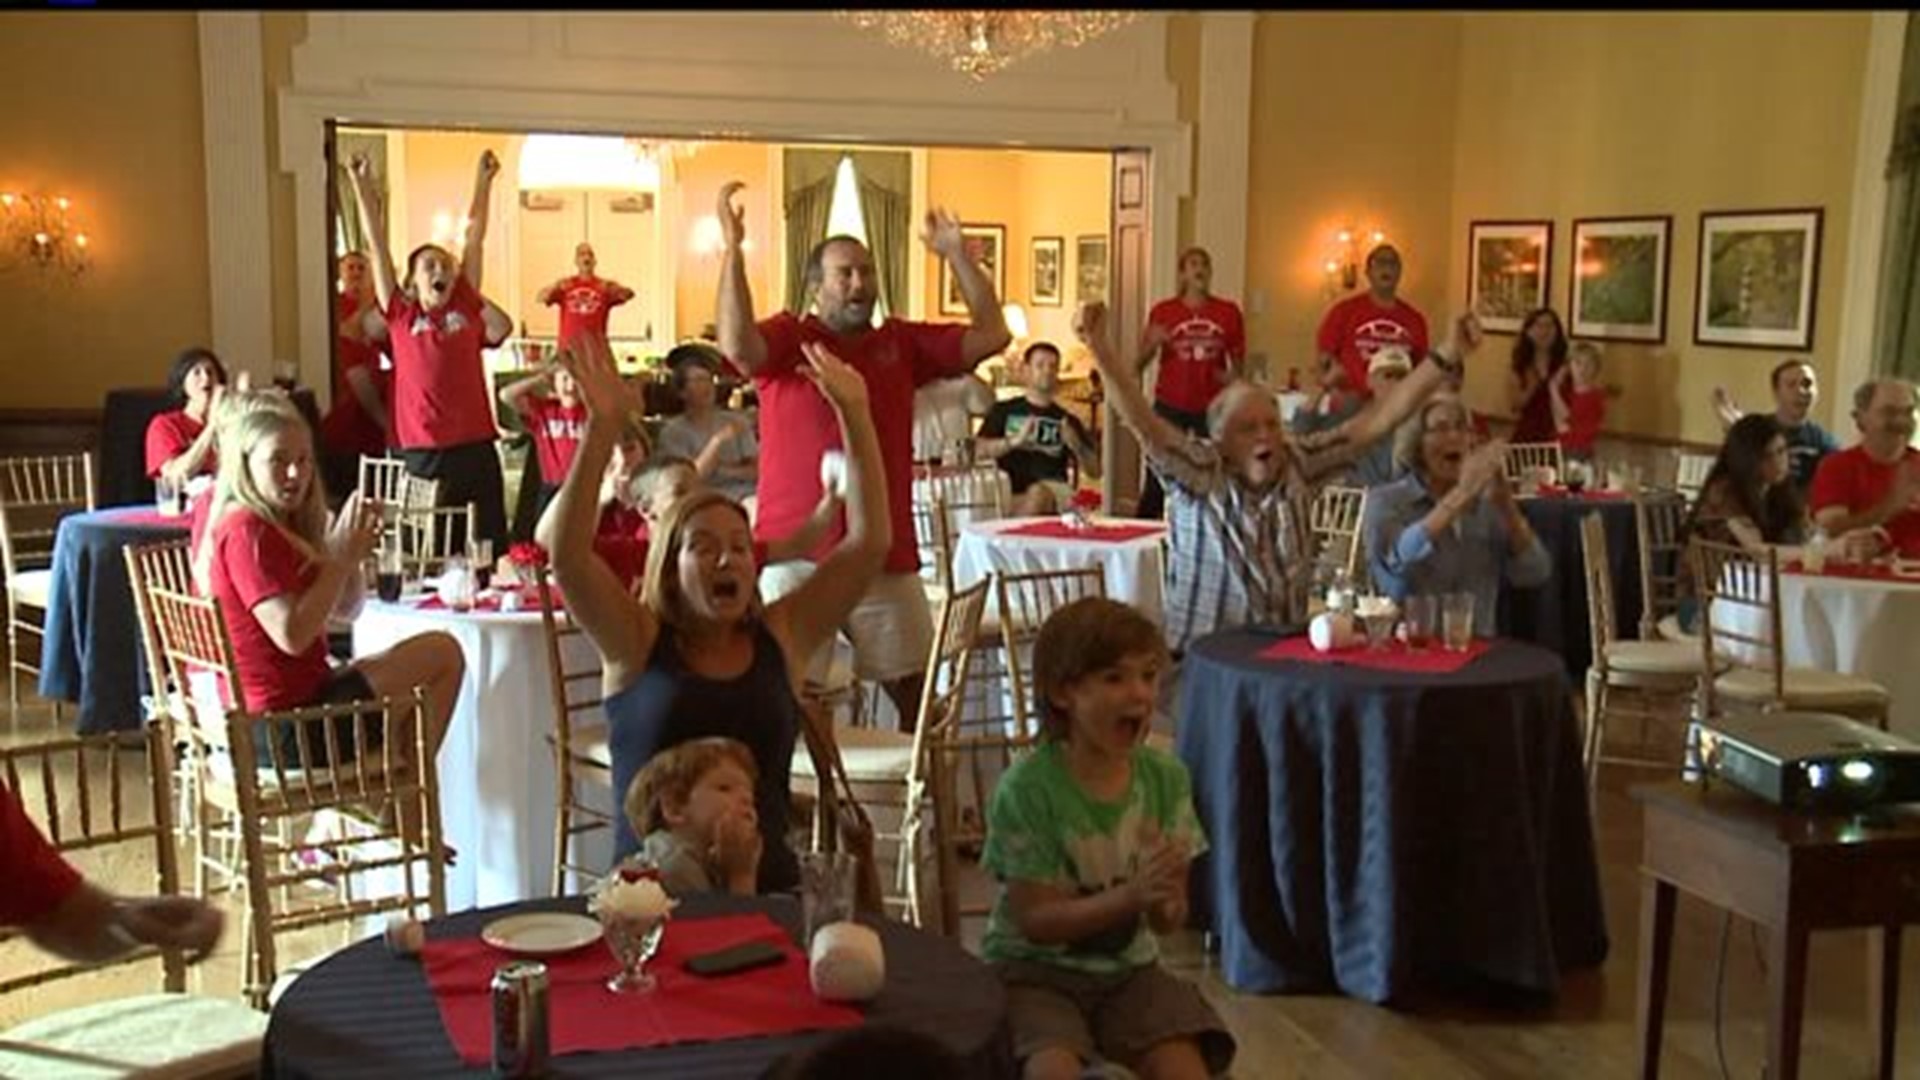 Governor hosts viewing party as Red Land clinches U.S. Championship